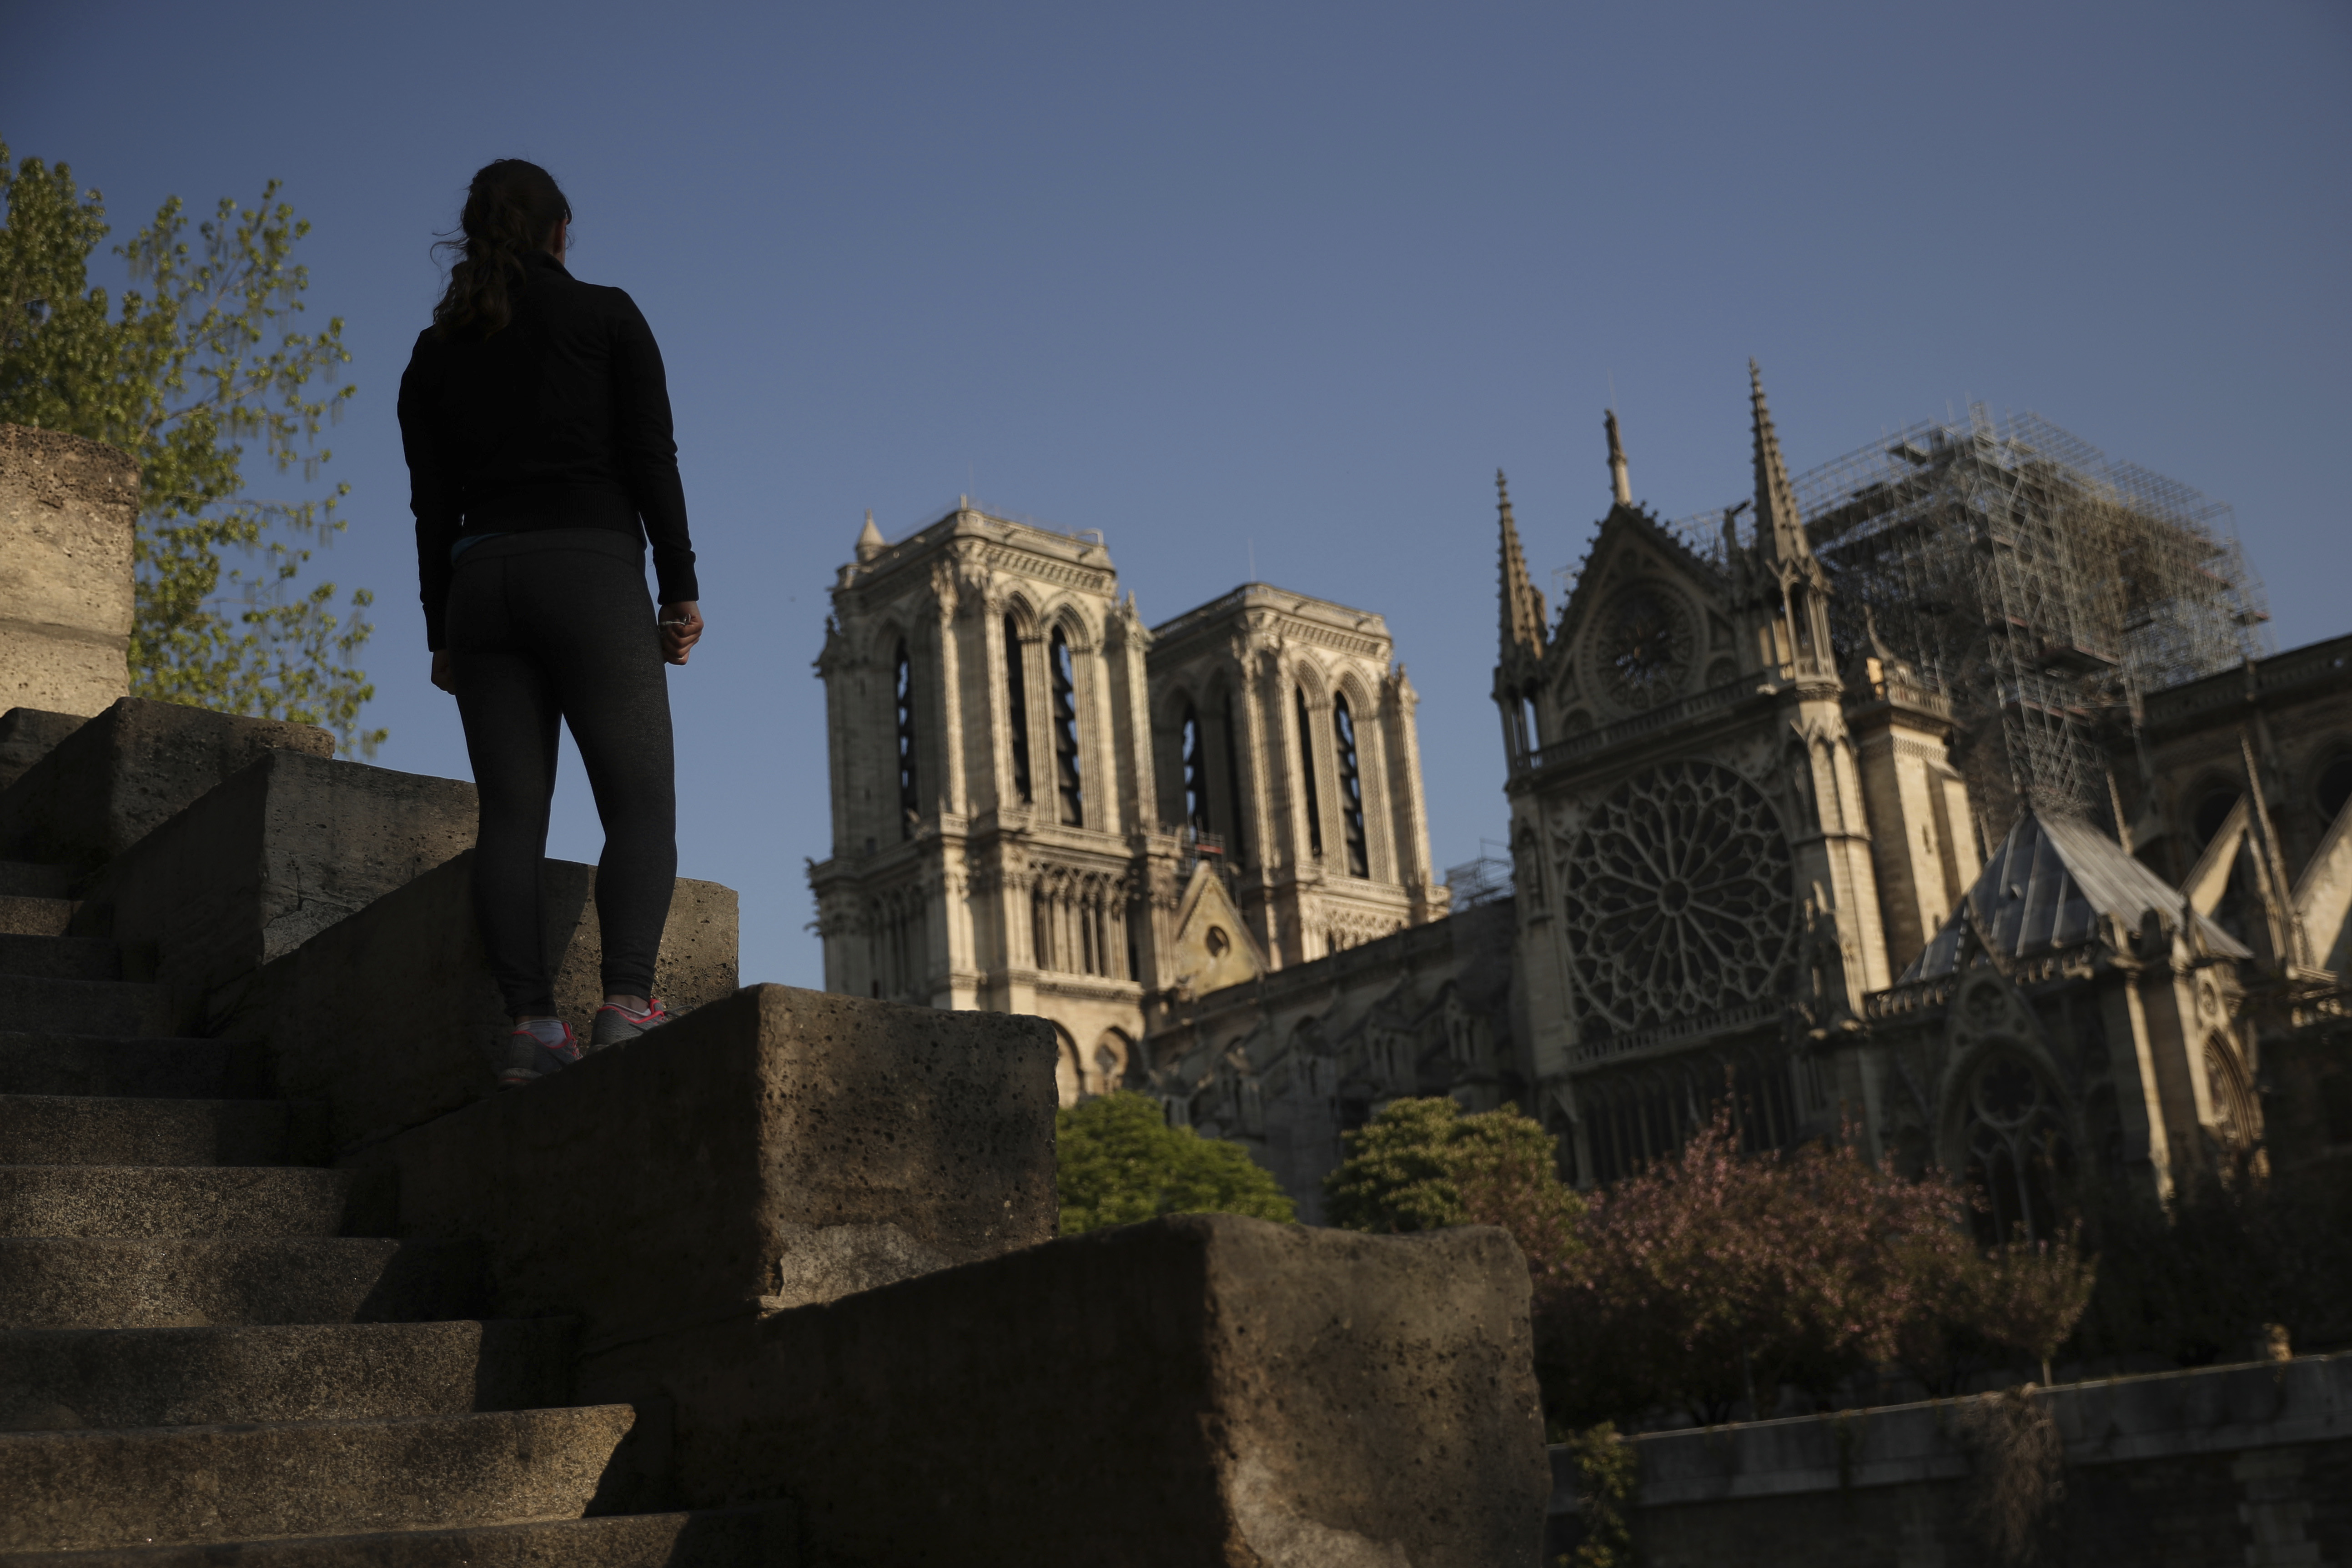 Tourists, Easter worshippers lament closure of Notre Dame